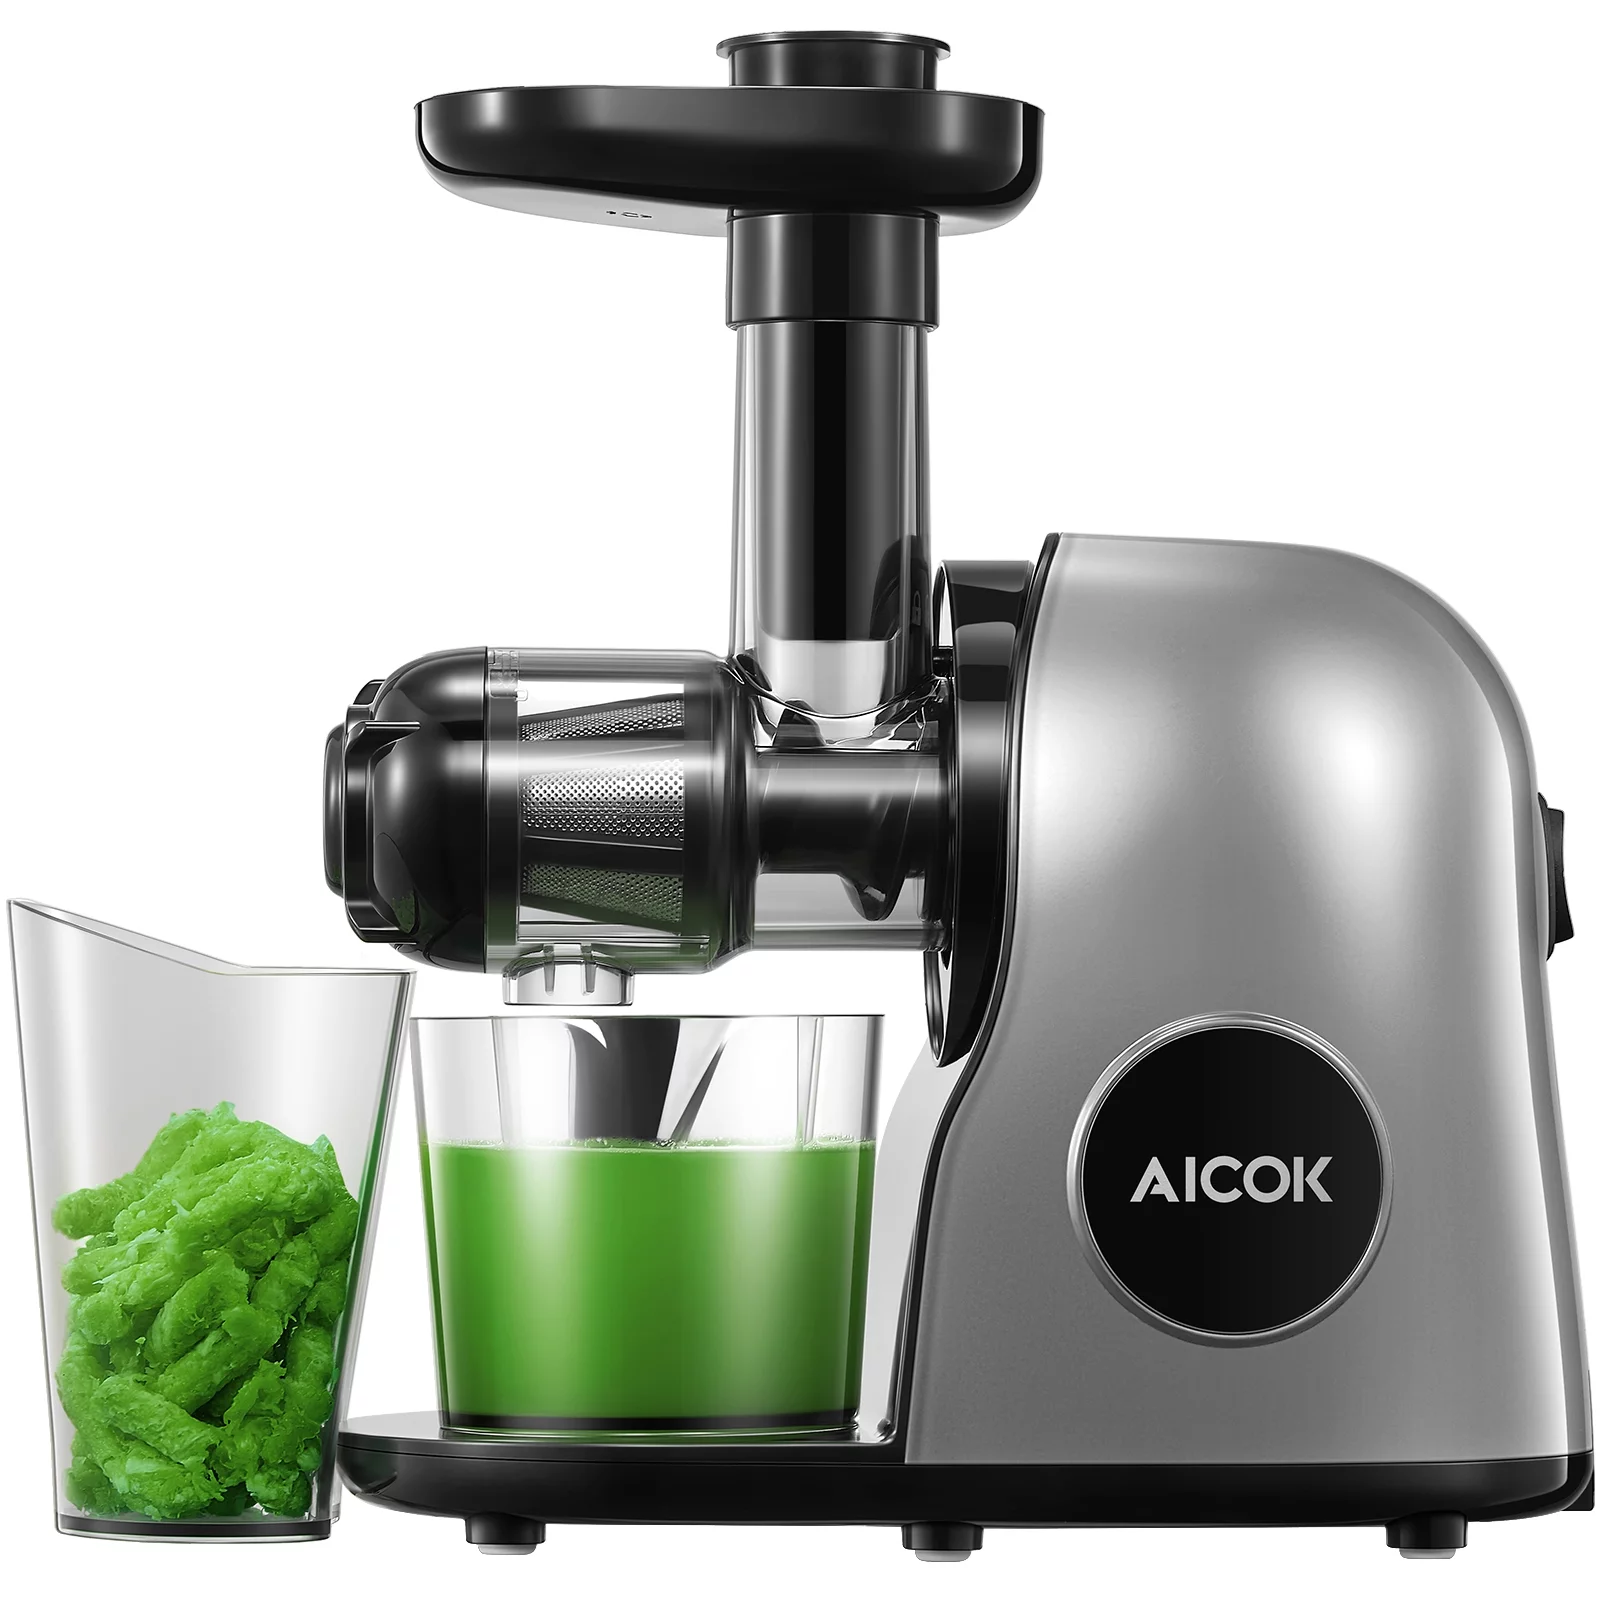 Top 15 Juice Extractors and their Prices in Nigeria 